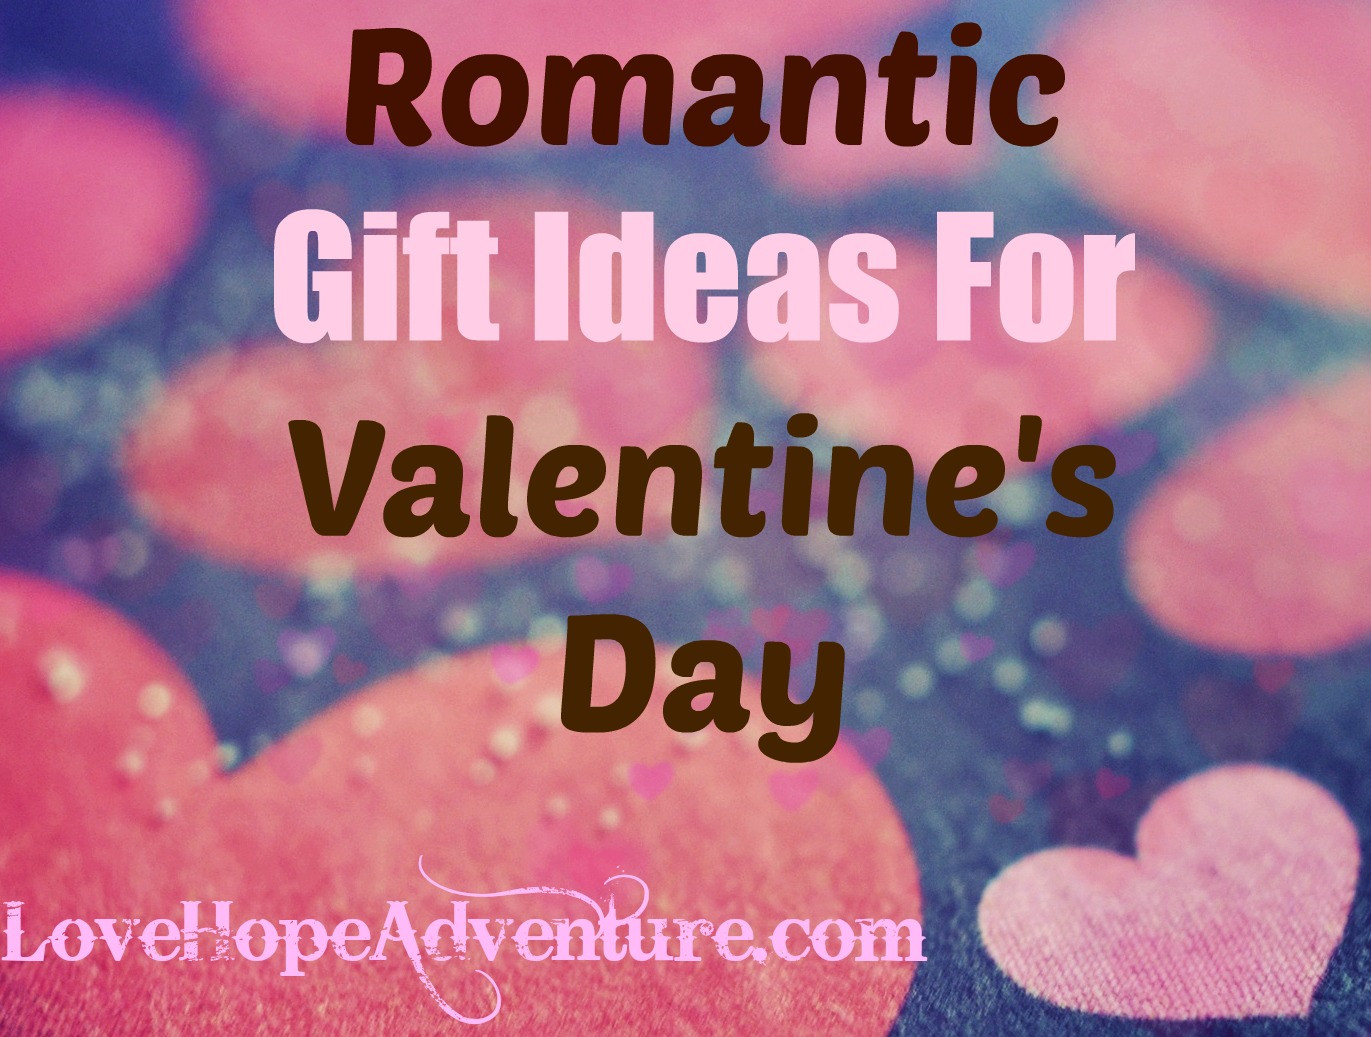 Romantic Valentines Gift Ideas
 Fun and Romantic Gift Ideas for Valentine s Day